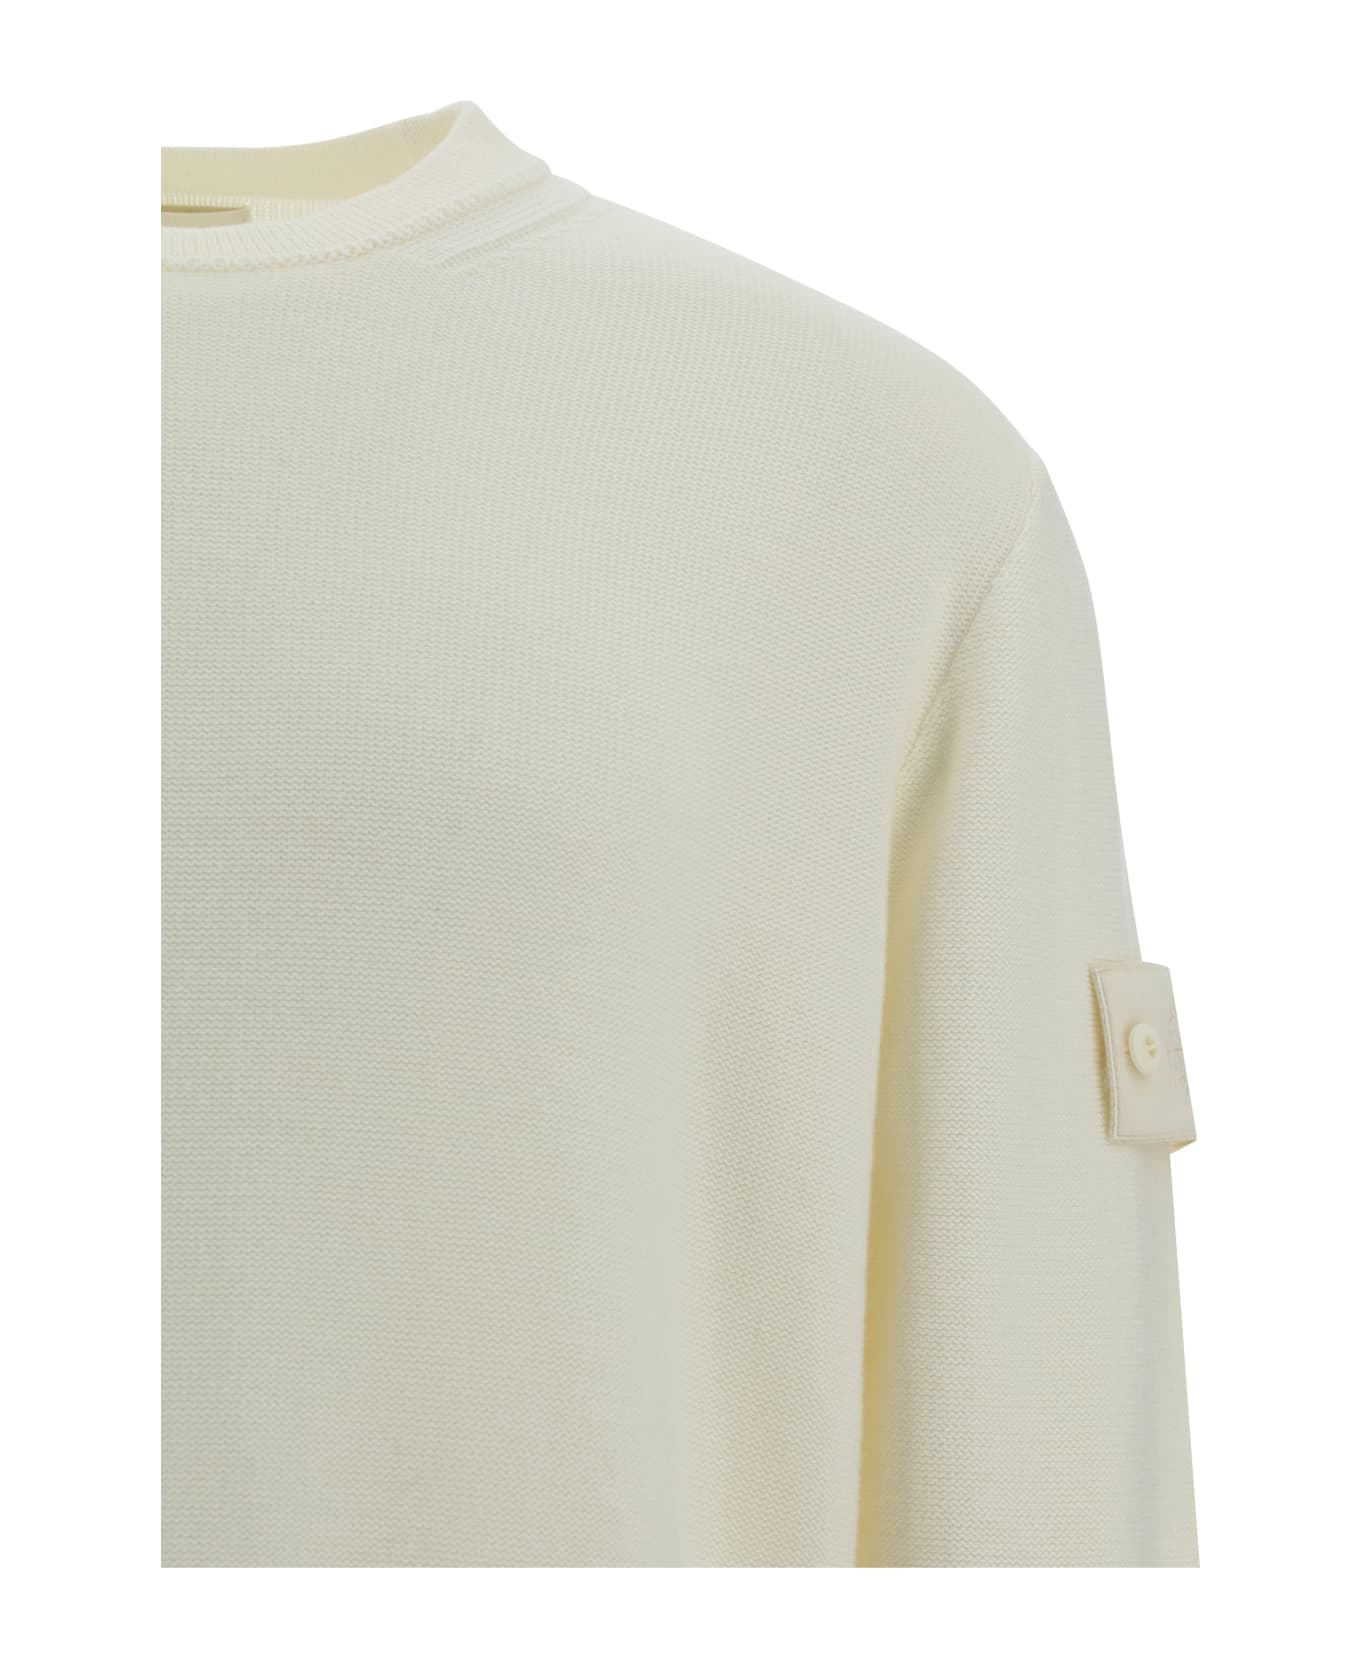 Stone Island Ghost Sweater - Bco Naturale